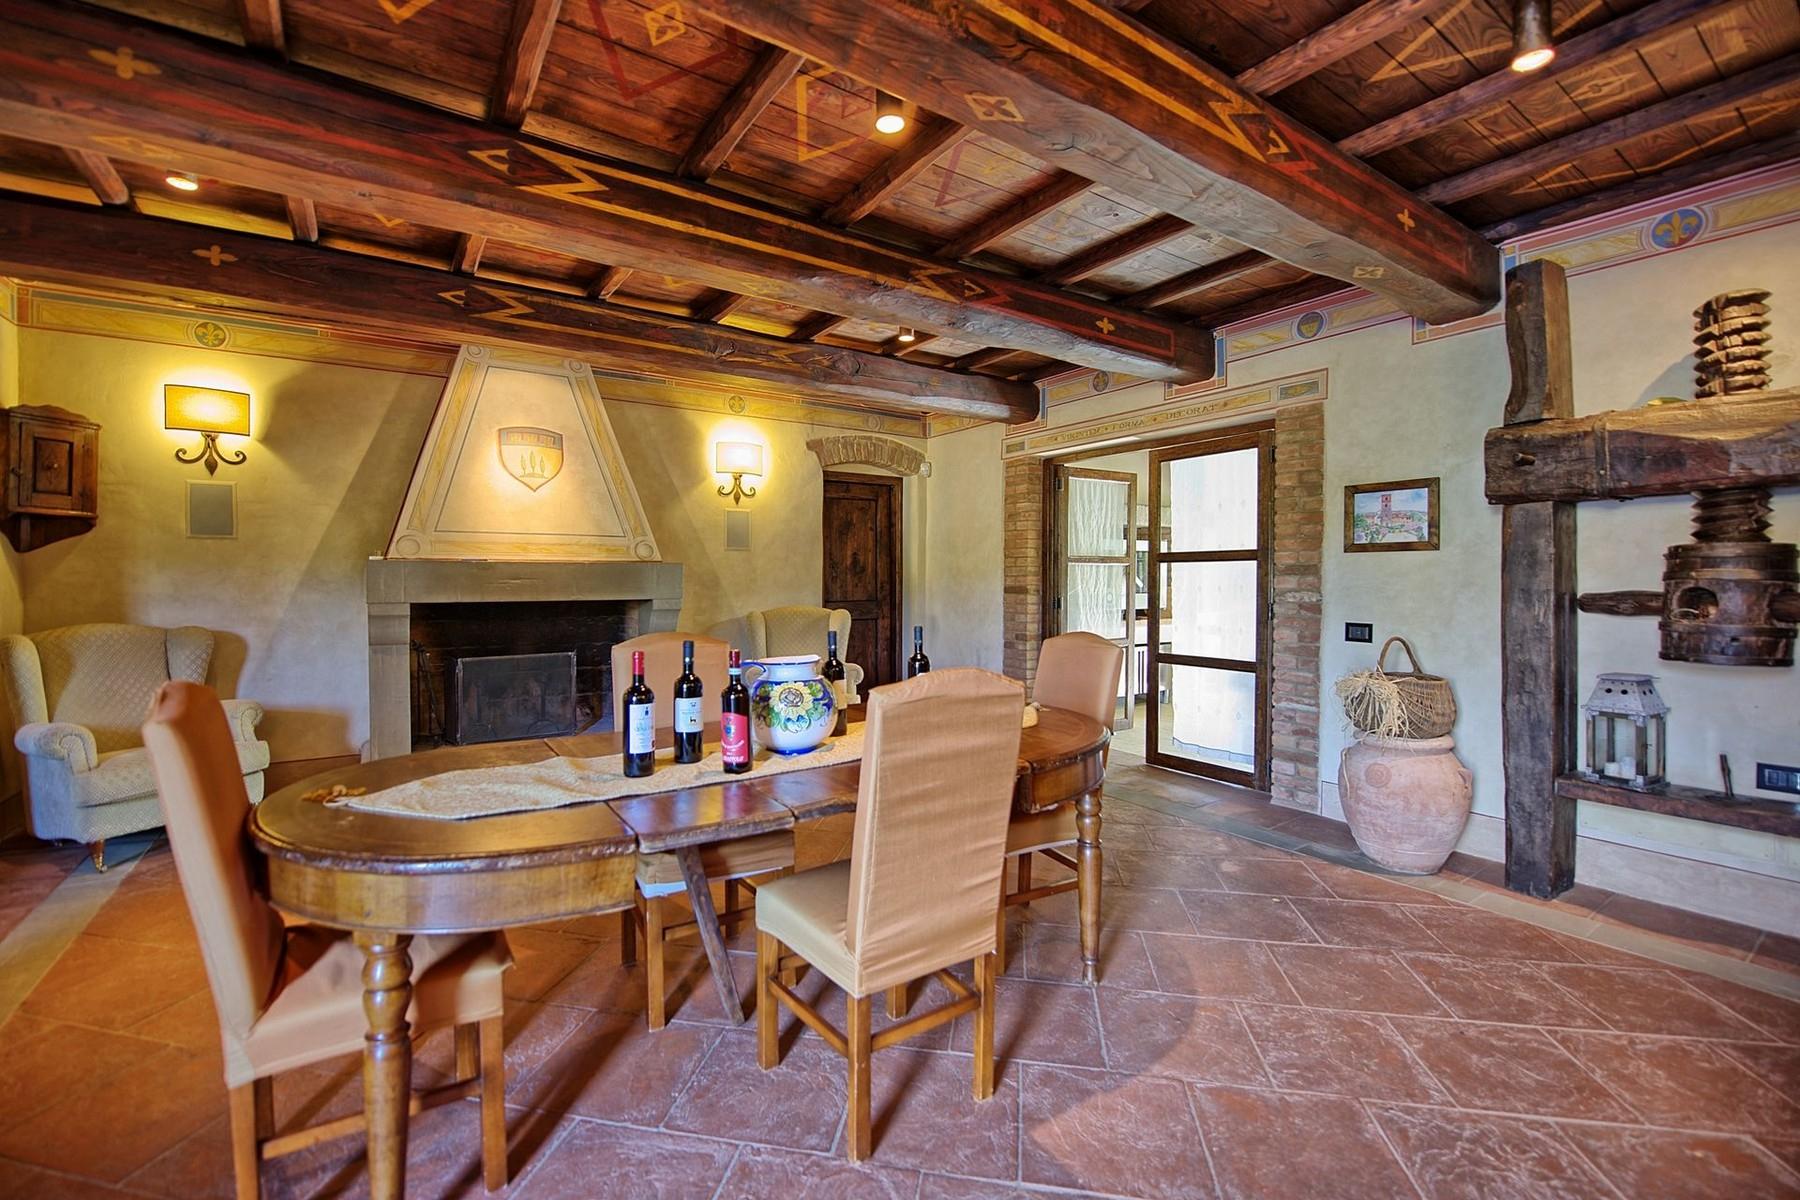 Farmhouse for sale in the Tuscan hills - 8